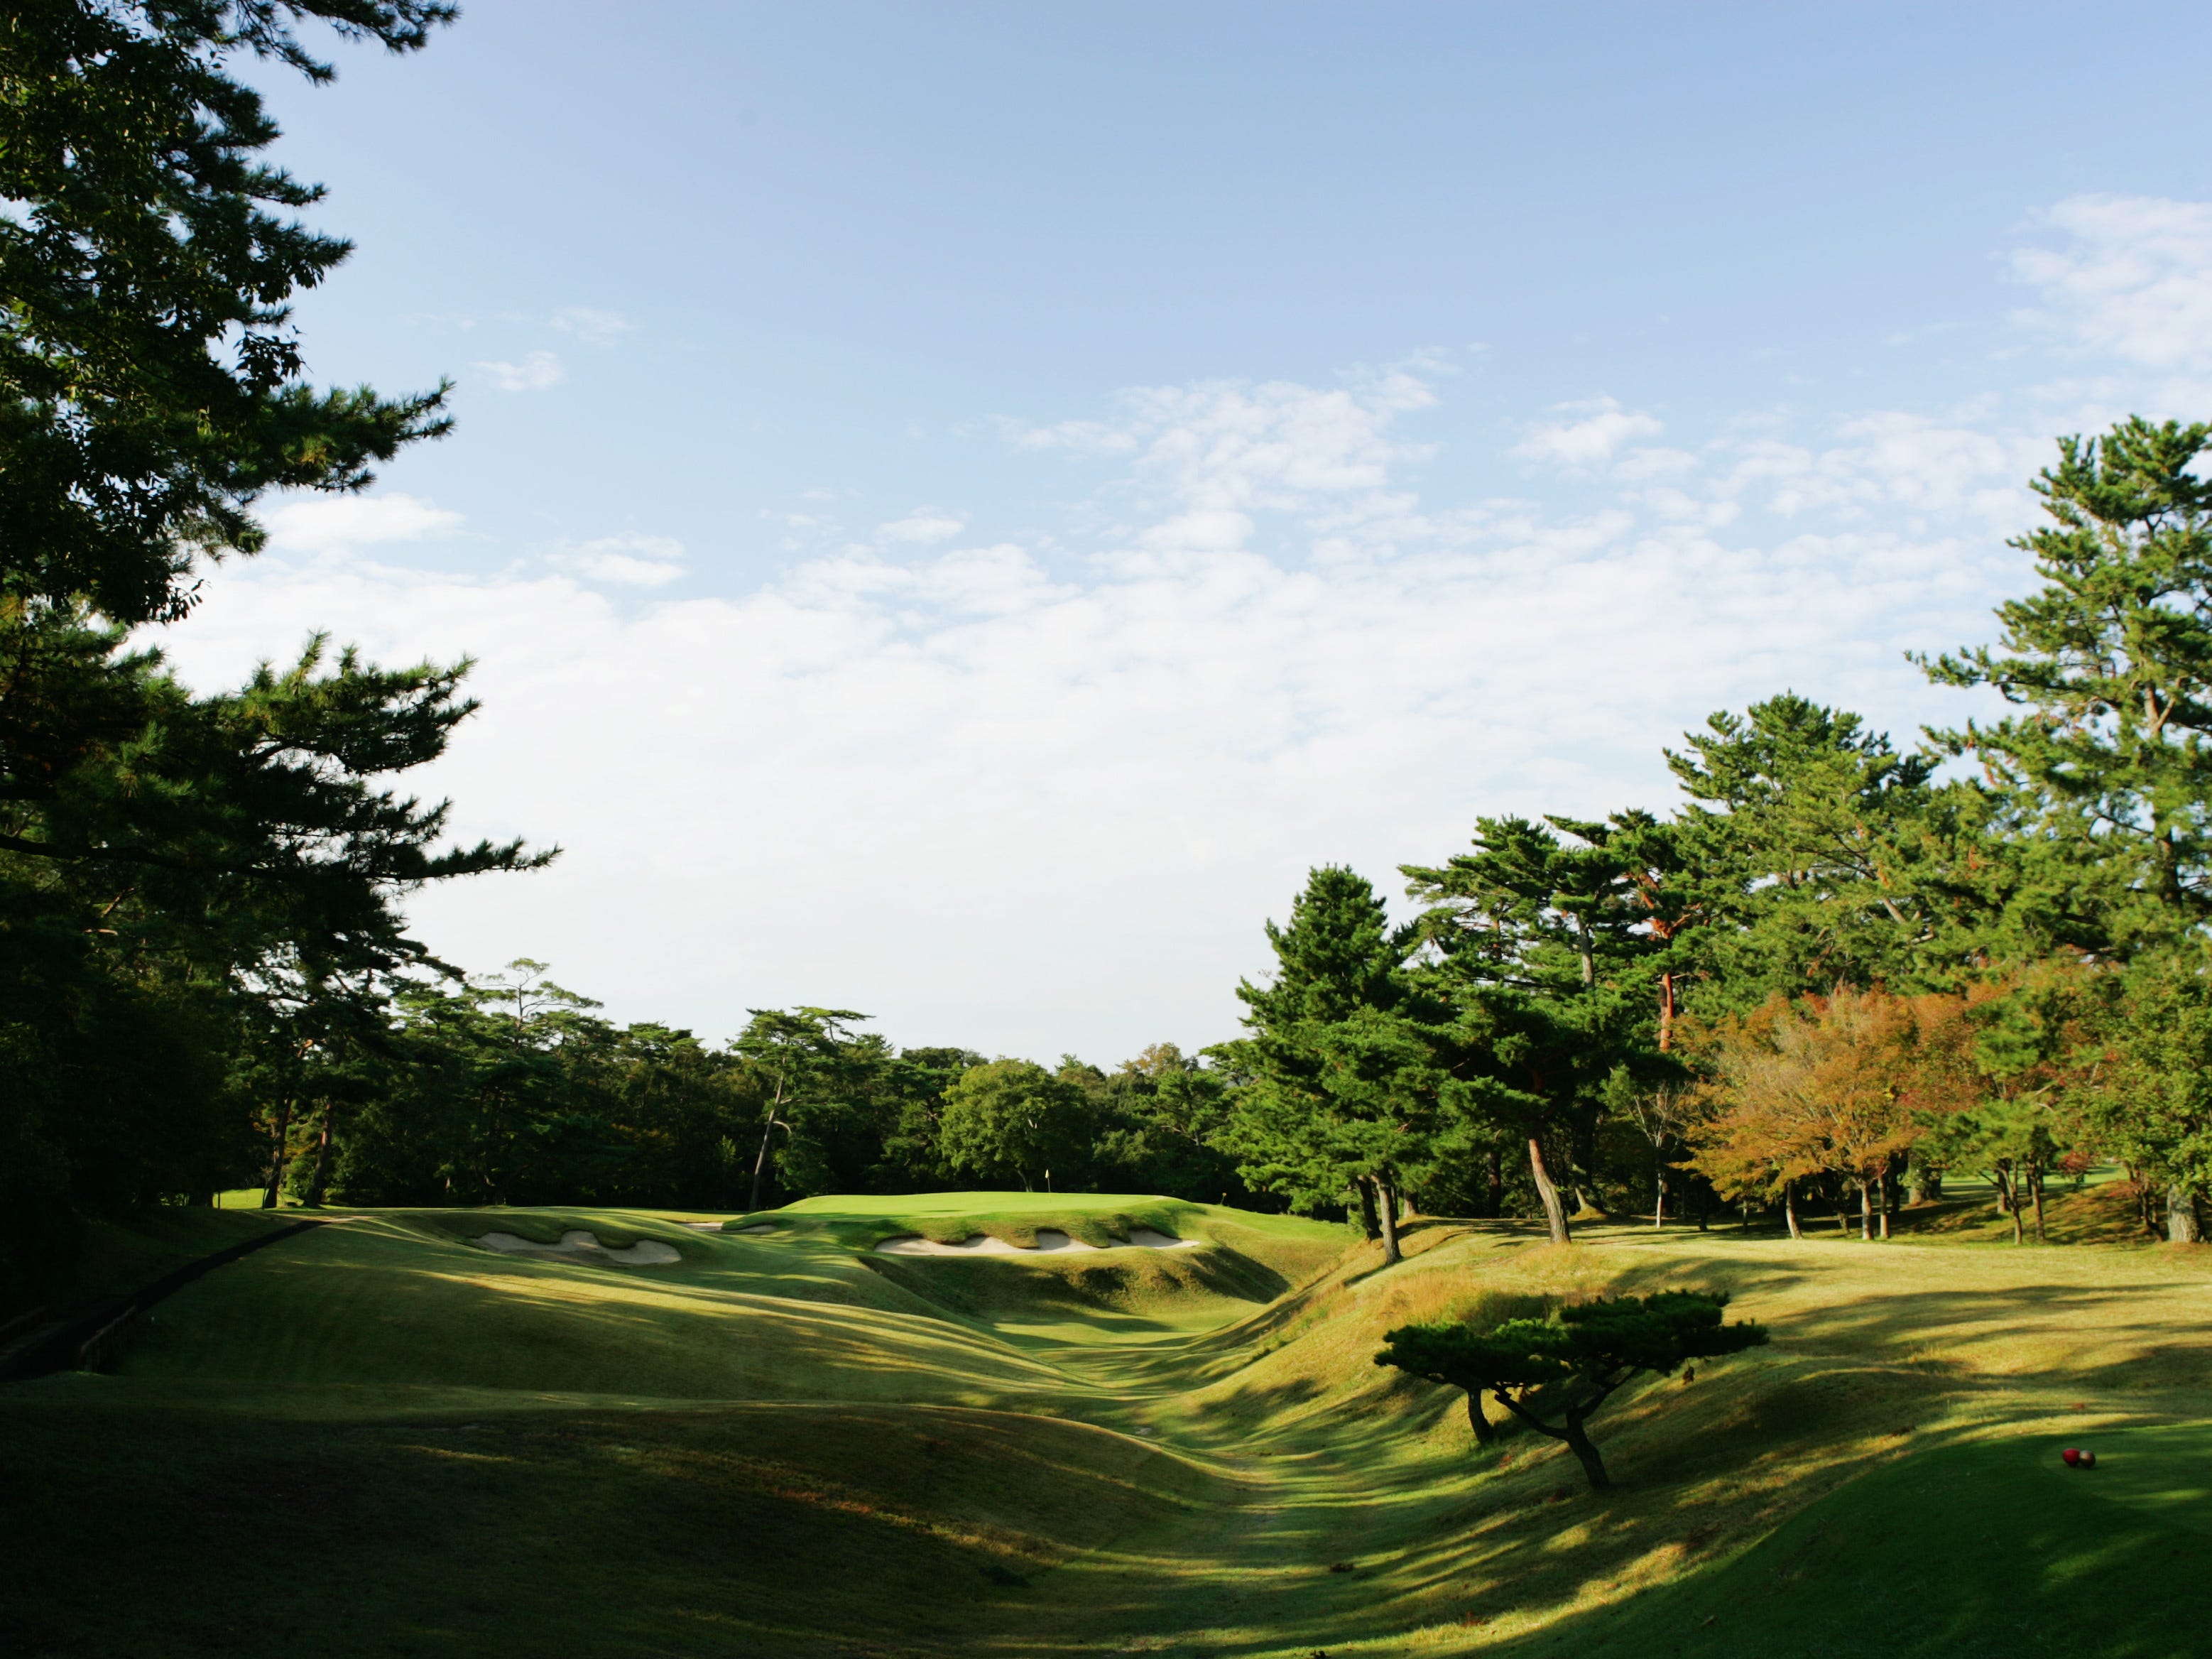 <p>Also featured on Golf.com's most exclusive golf clubs in the world in 2019, Hirono Golf Club in Kobe, Japan, has a reputation for being especially private; the last professional tournament played there was the 70th Japan Open Golf Championship in 2005.</p><p>While most golf courses are known for having dress codes, some of Hirono's rules are incredibly specific.</p><p>Per <a href="https://hironogolfclub.jp/en/information/">the club's website</a>, guidelines for playing attire include no clothing with "showy colors or patterns" like red or camouflage, no mock-neck shirts, no shirts without collars and sleeves, no ankle socks, and no clothing or hats "designed with conspicuous advertising intentions."</p><p>Only members and their guests are allowed access to Hirono, and both parties are held to the same high standards, with the club noting that members are "fully responsible for the conduct of the visitor," who should be fully informed on the rules and course etiquette before arrival.</p>